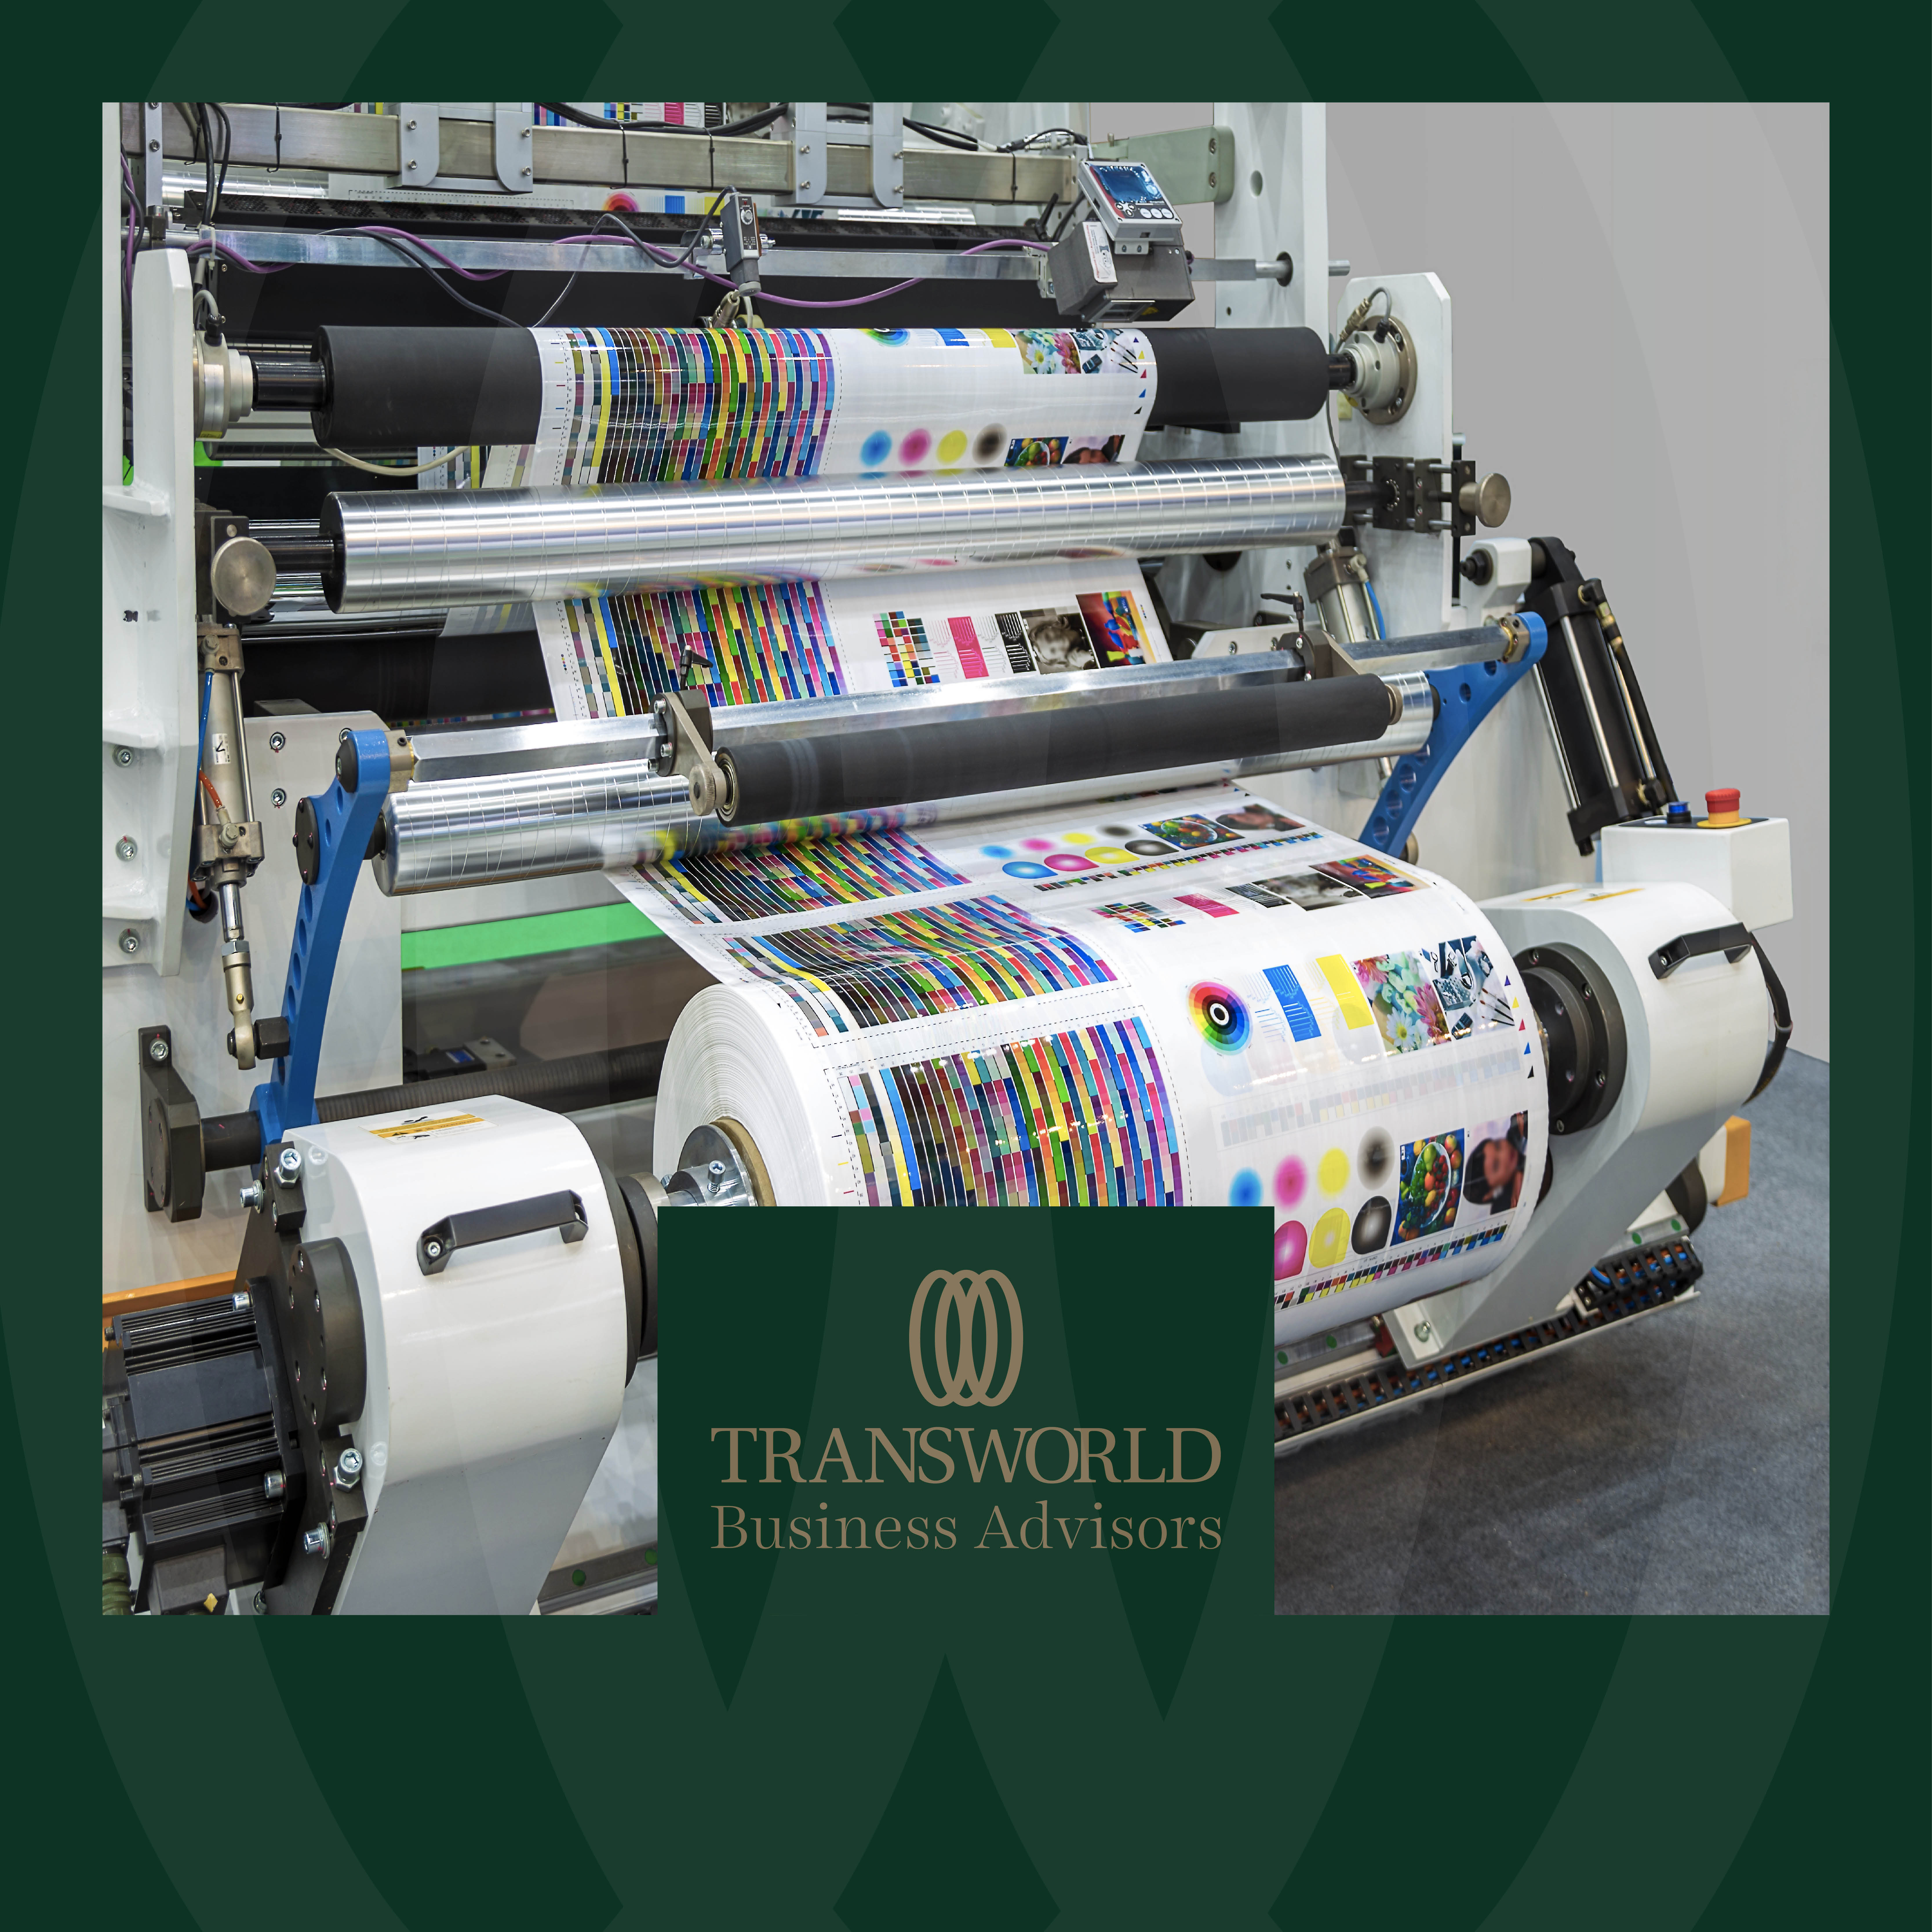 High quality large format printing business